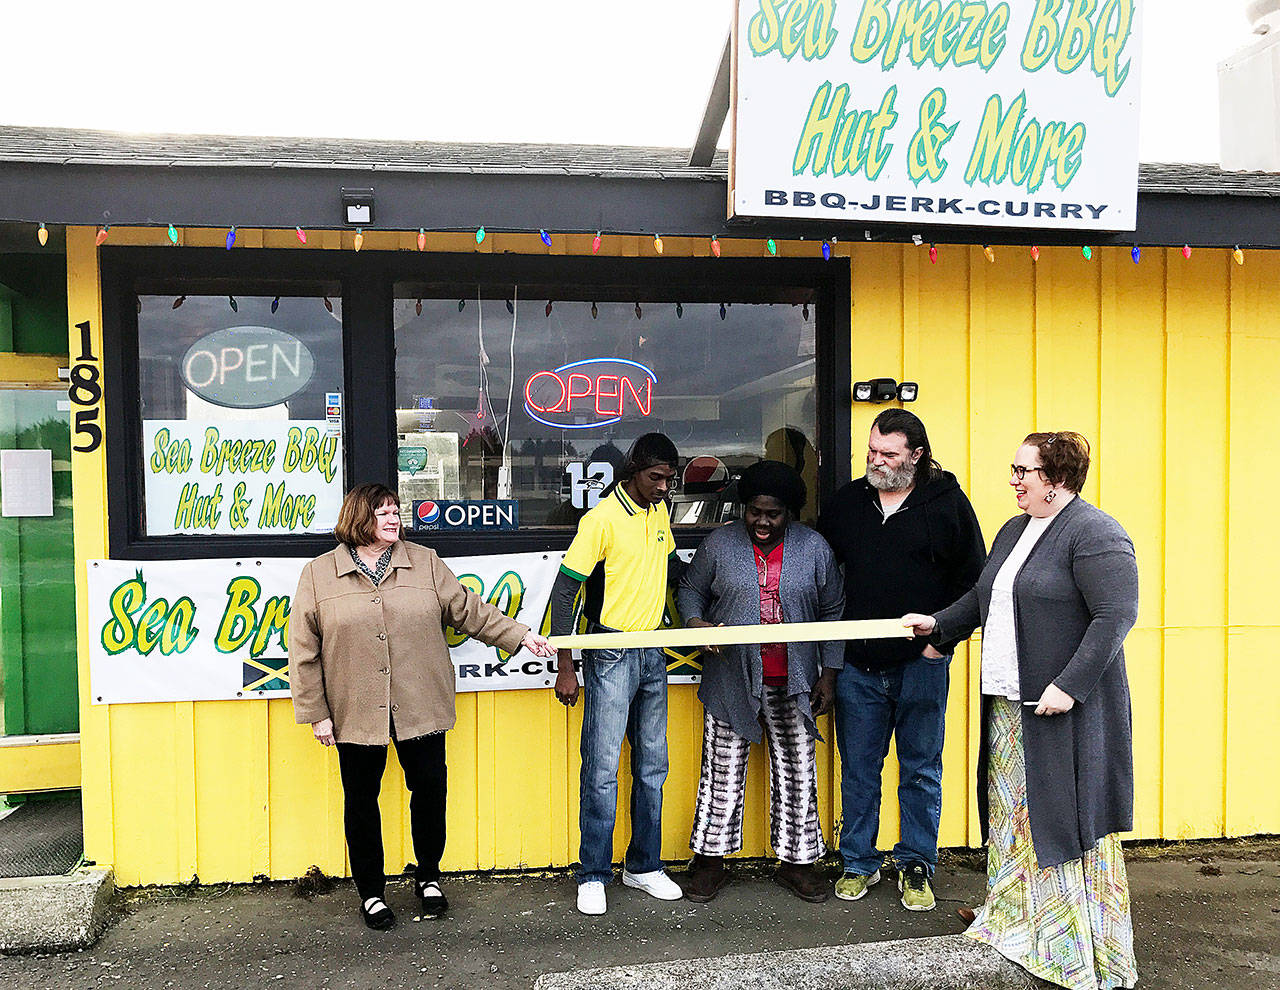 Ocean Shores/North Beach Chamber photo of the recent ribbon cutting at Sea Breeze BBQ Hut & More on Chance a la Mer.